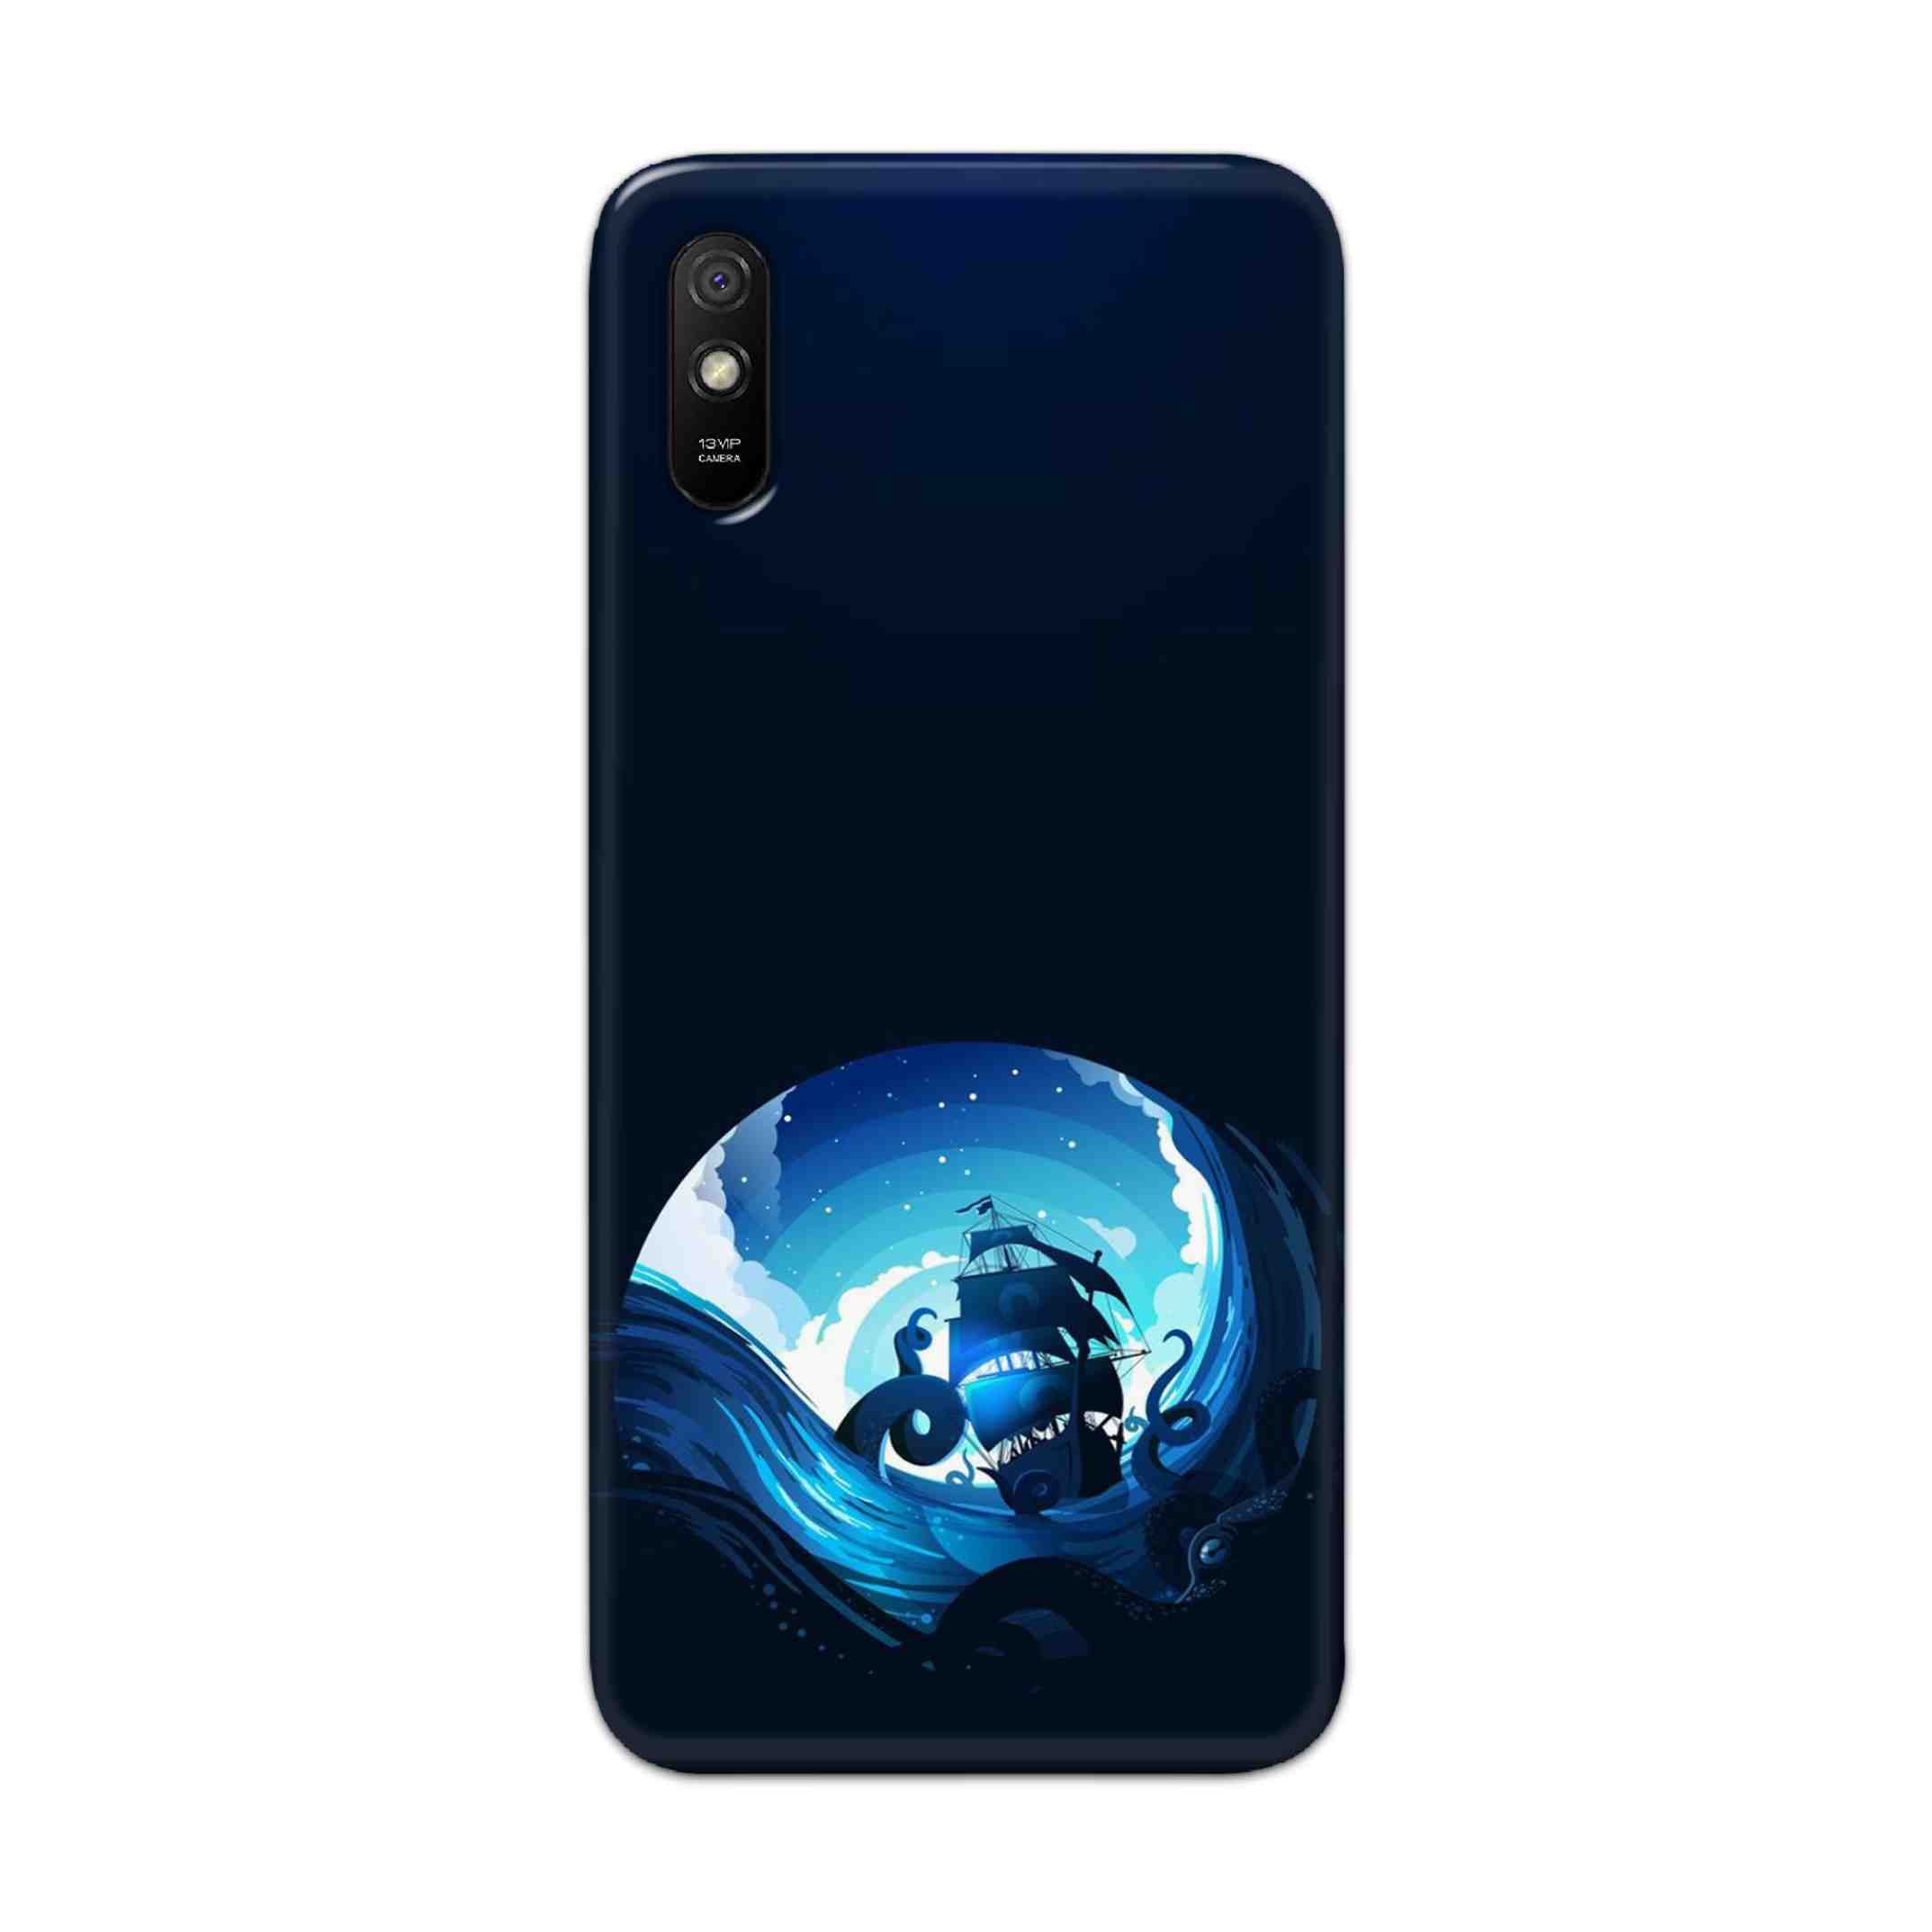 Buy Blue Sea Ship Hard Back Mobile Phone Case Cover For Redmi 9A Online